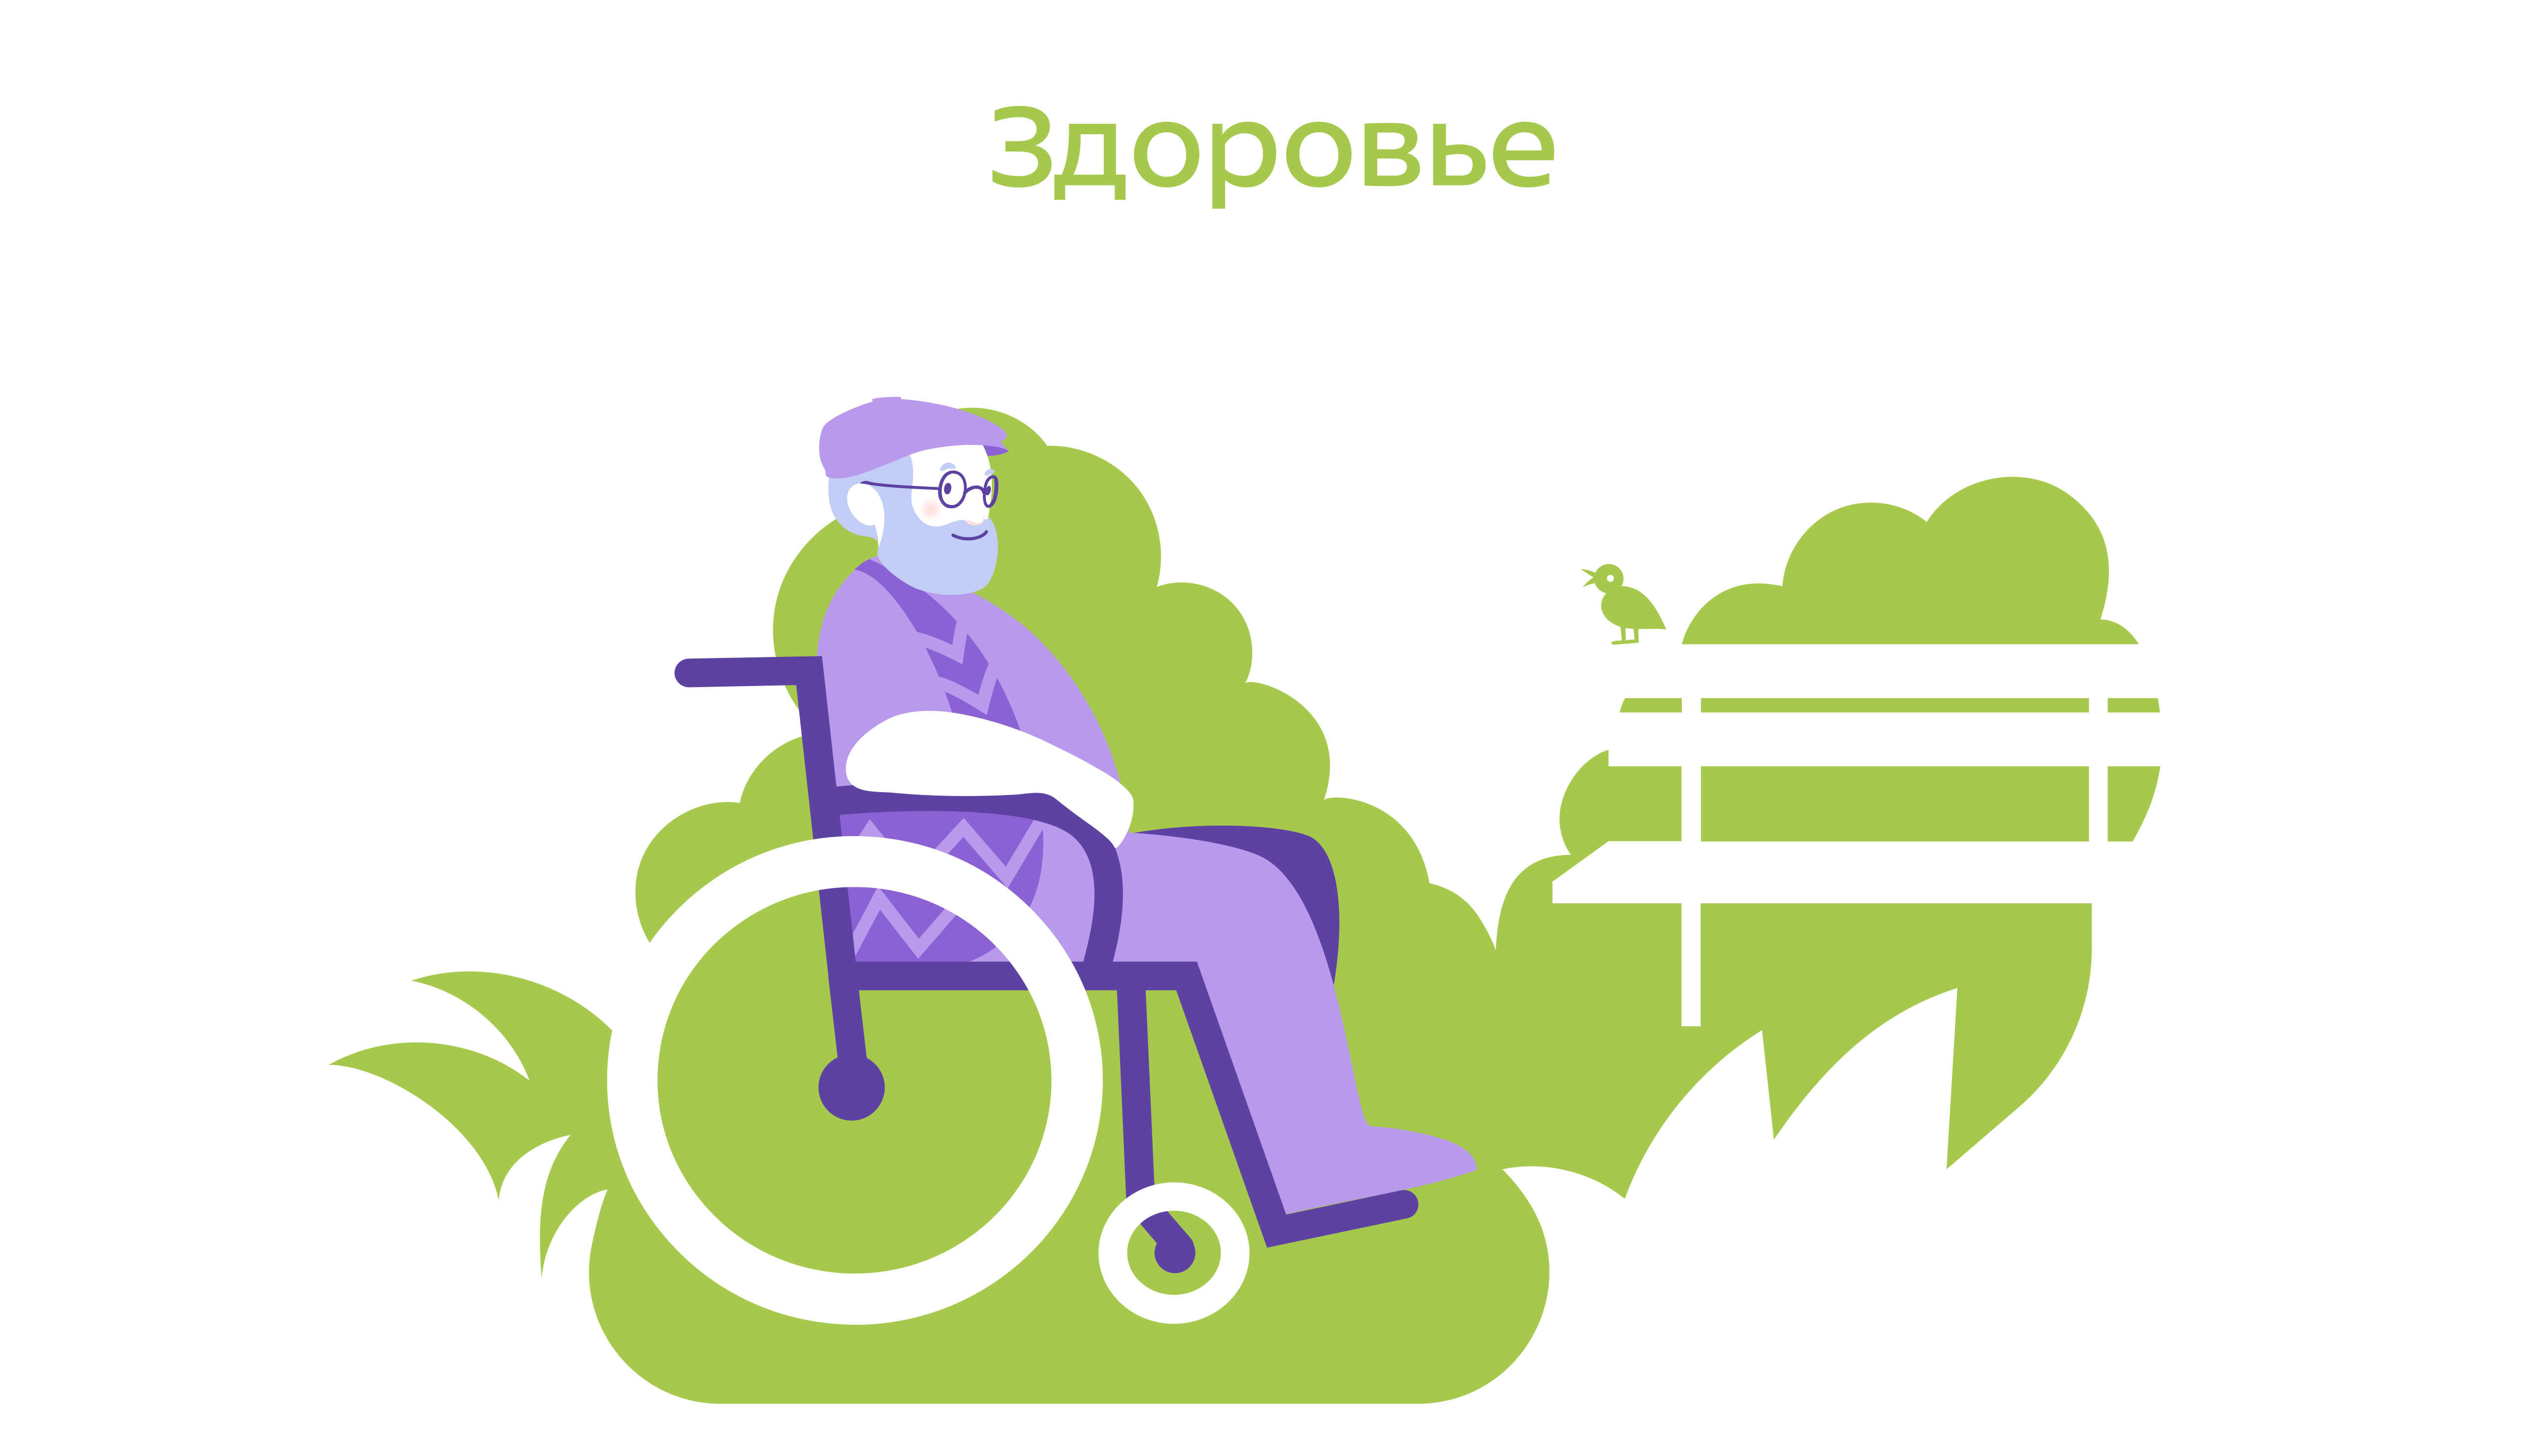 moscow care ill 2